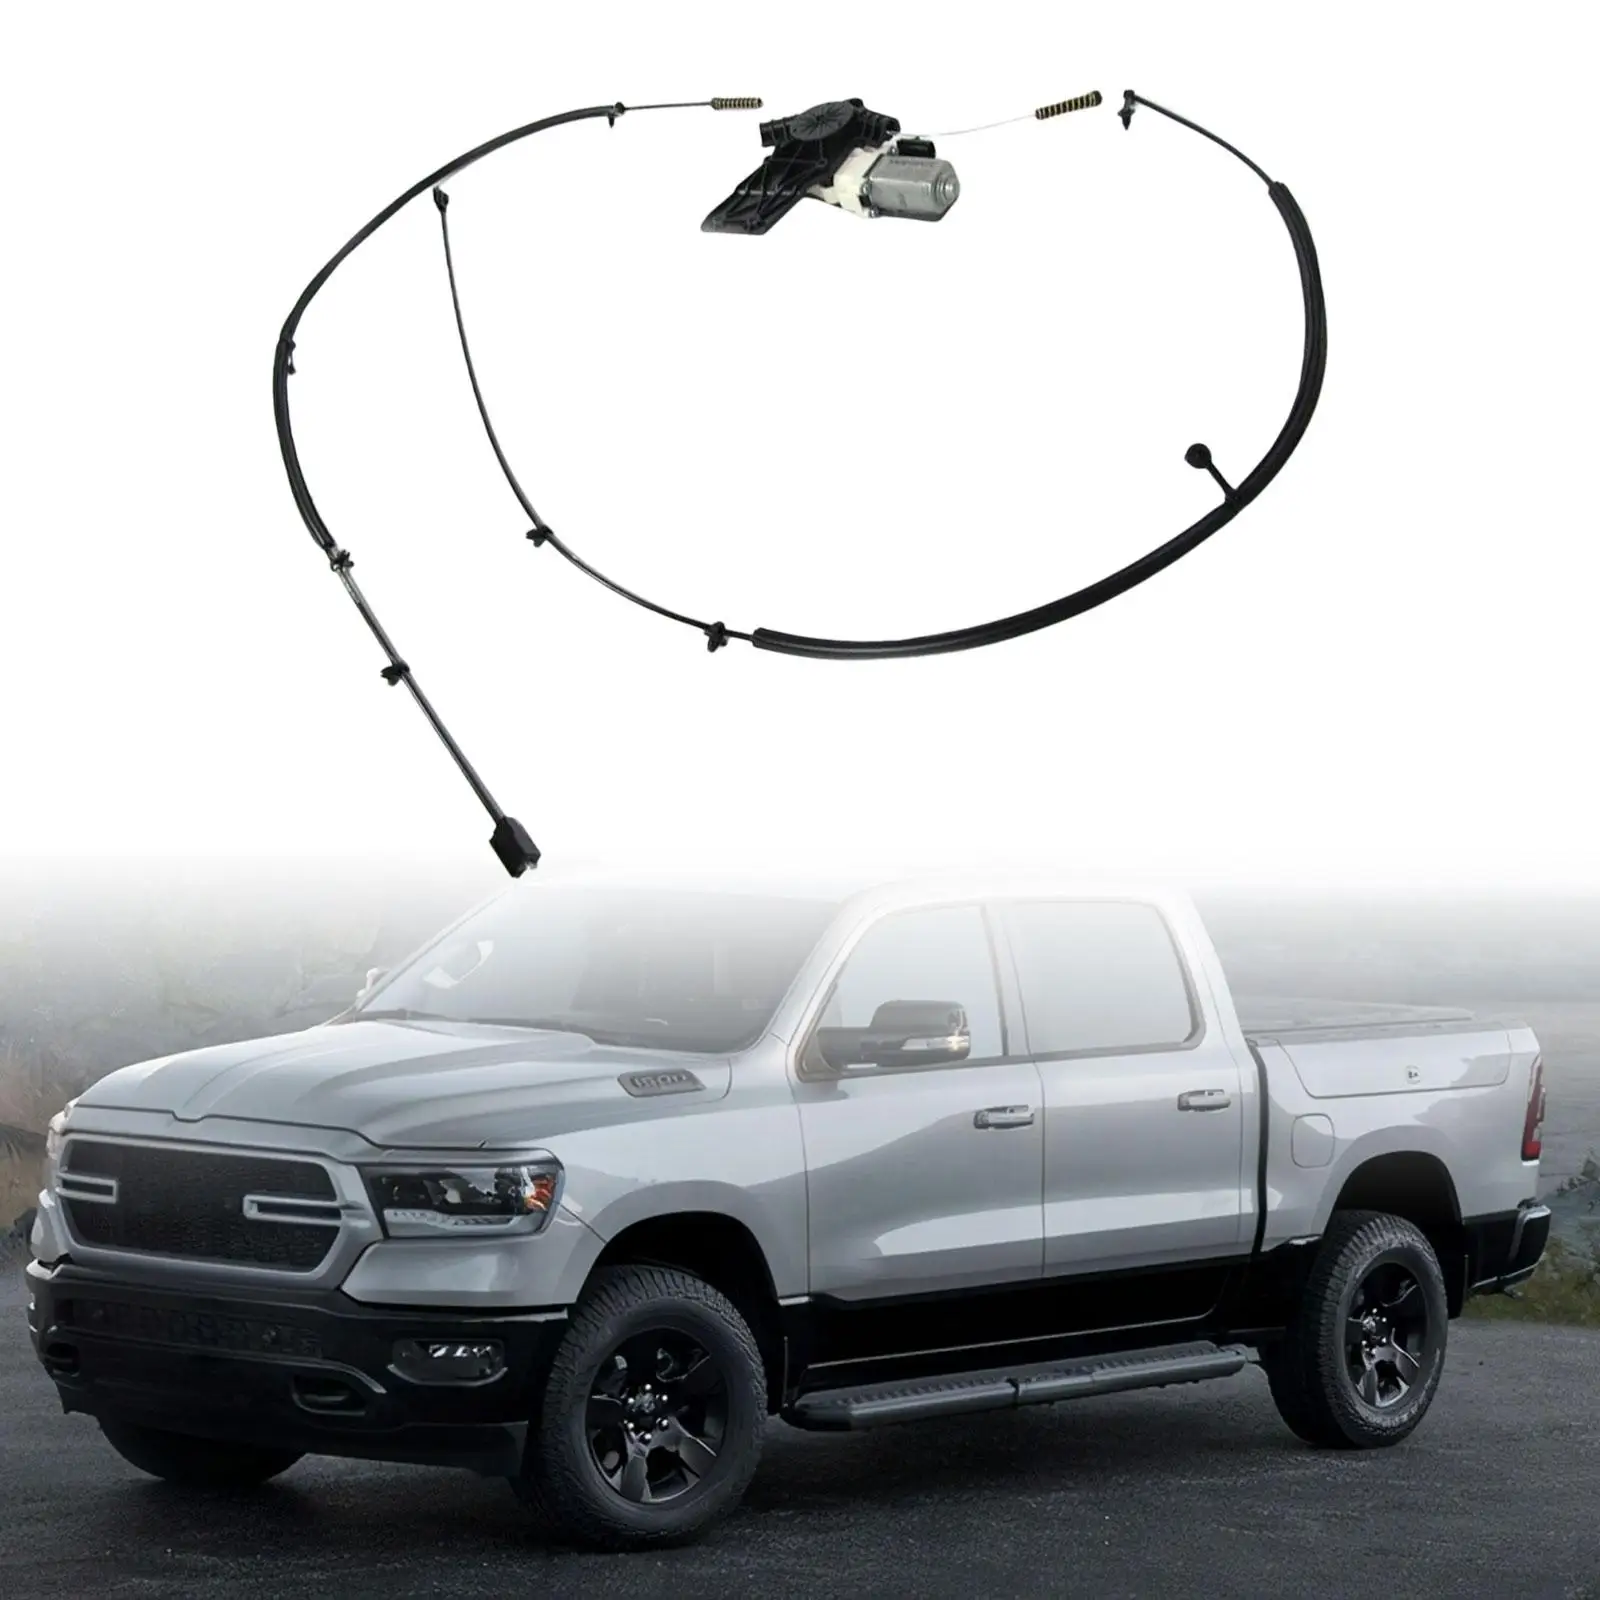 Rear Power Sliding Window Motor Cable Replace for Dodge RAM 1500 09-14